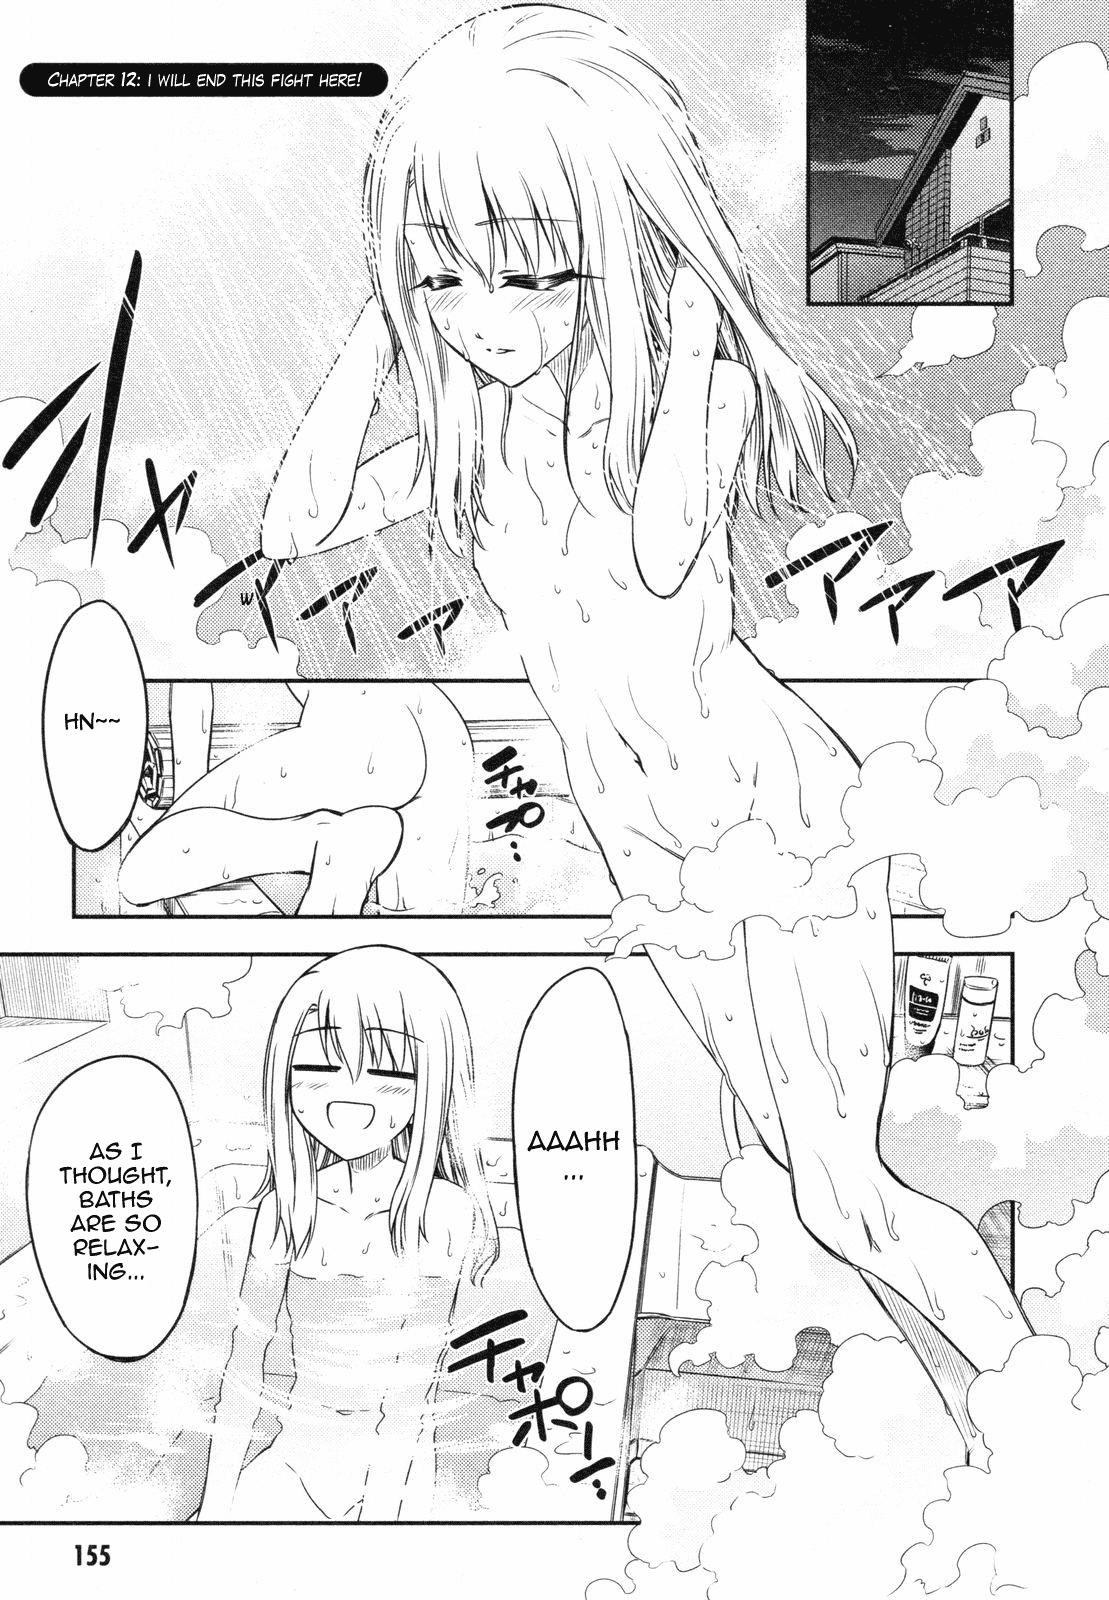 Fate/kaleid Liner Prisma☆Illya Vol.2 Chapter 12: I Will End This Fight Here! - Picture 1